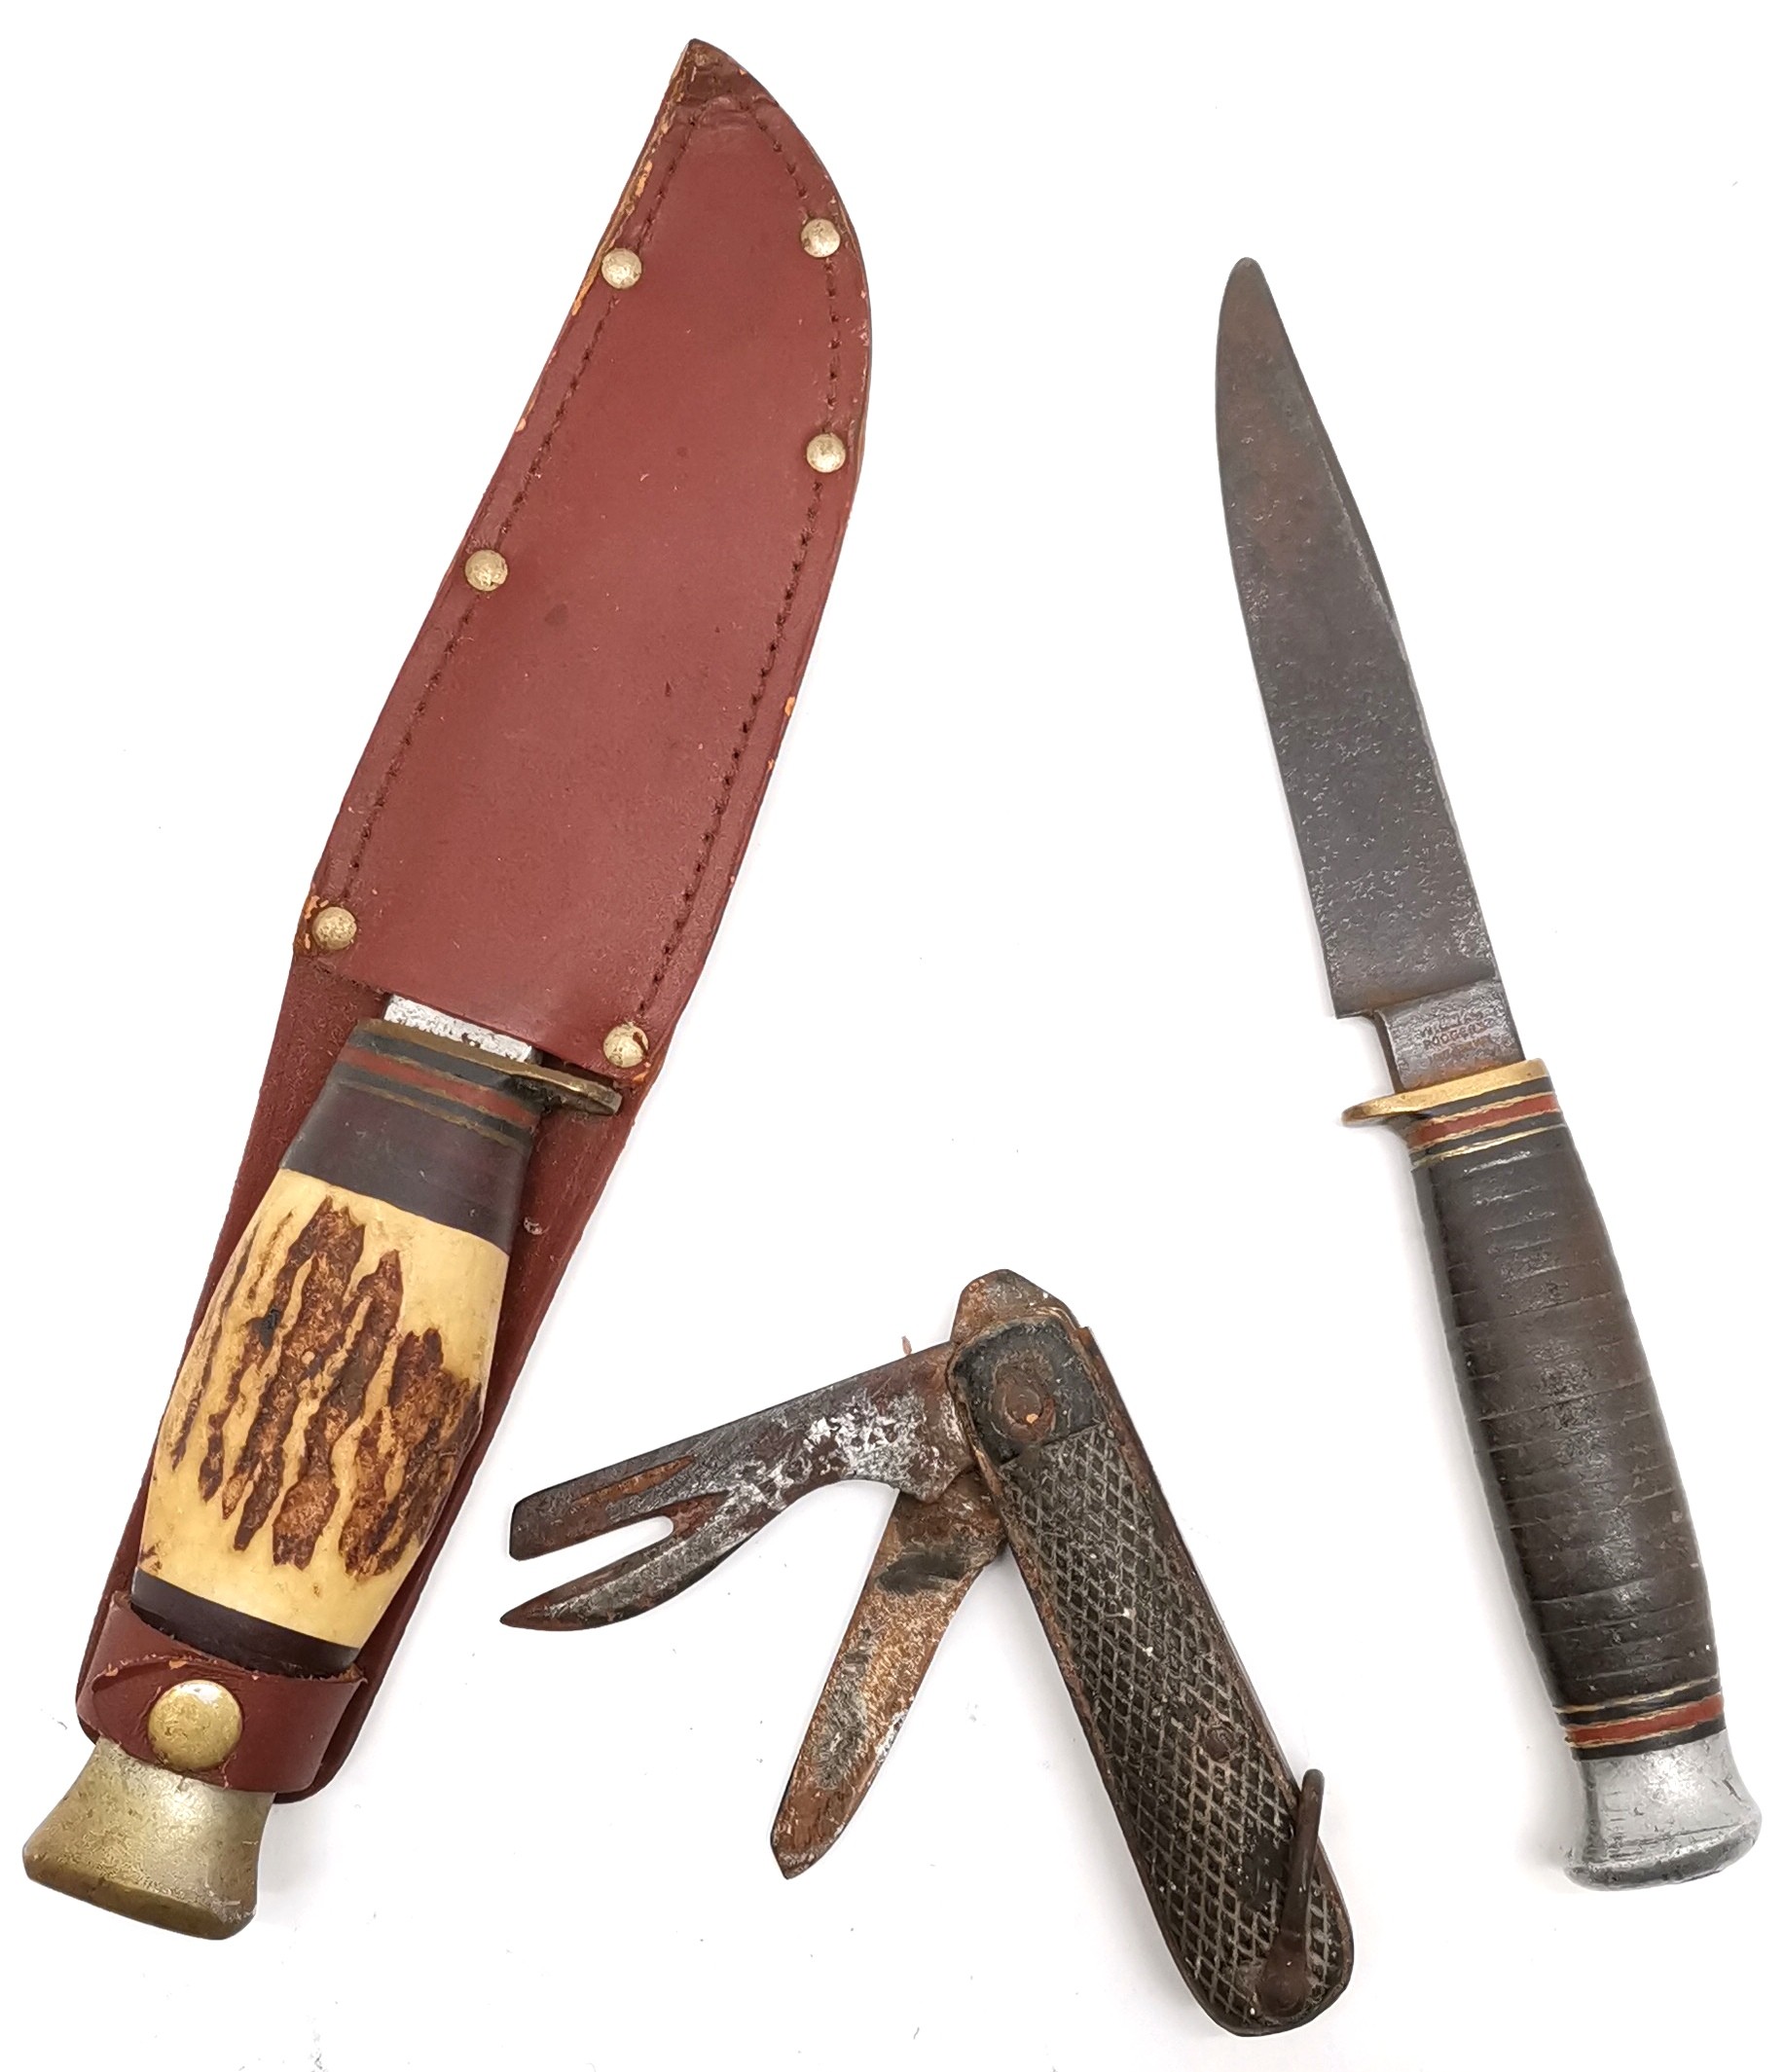 1943 military marked lock knife marked S.S.P. t/w Nowill & Sons sheath knife (23.5cm knife) in